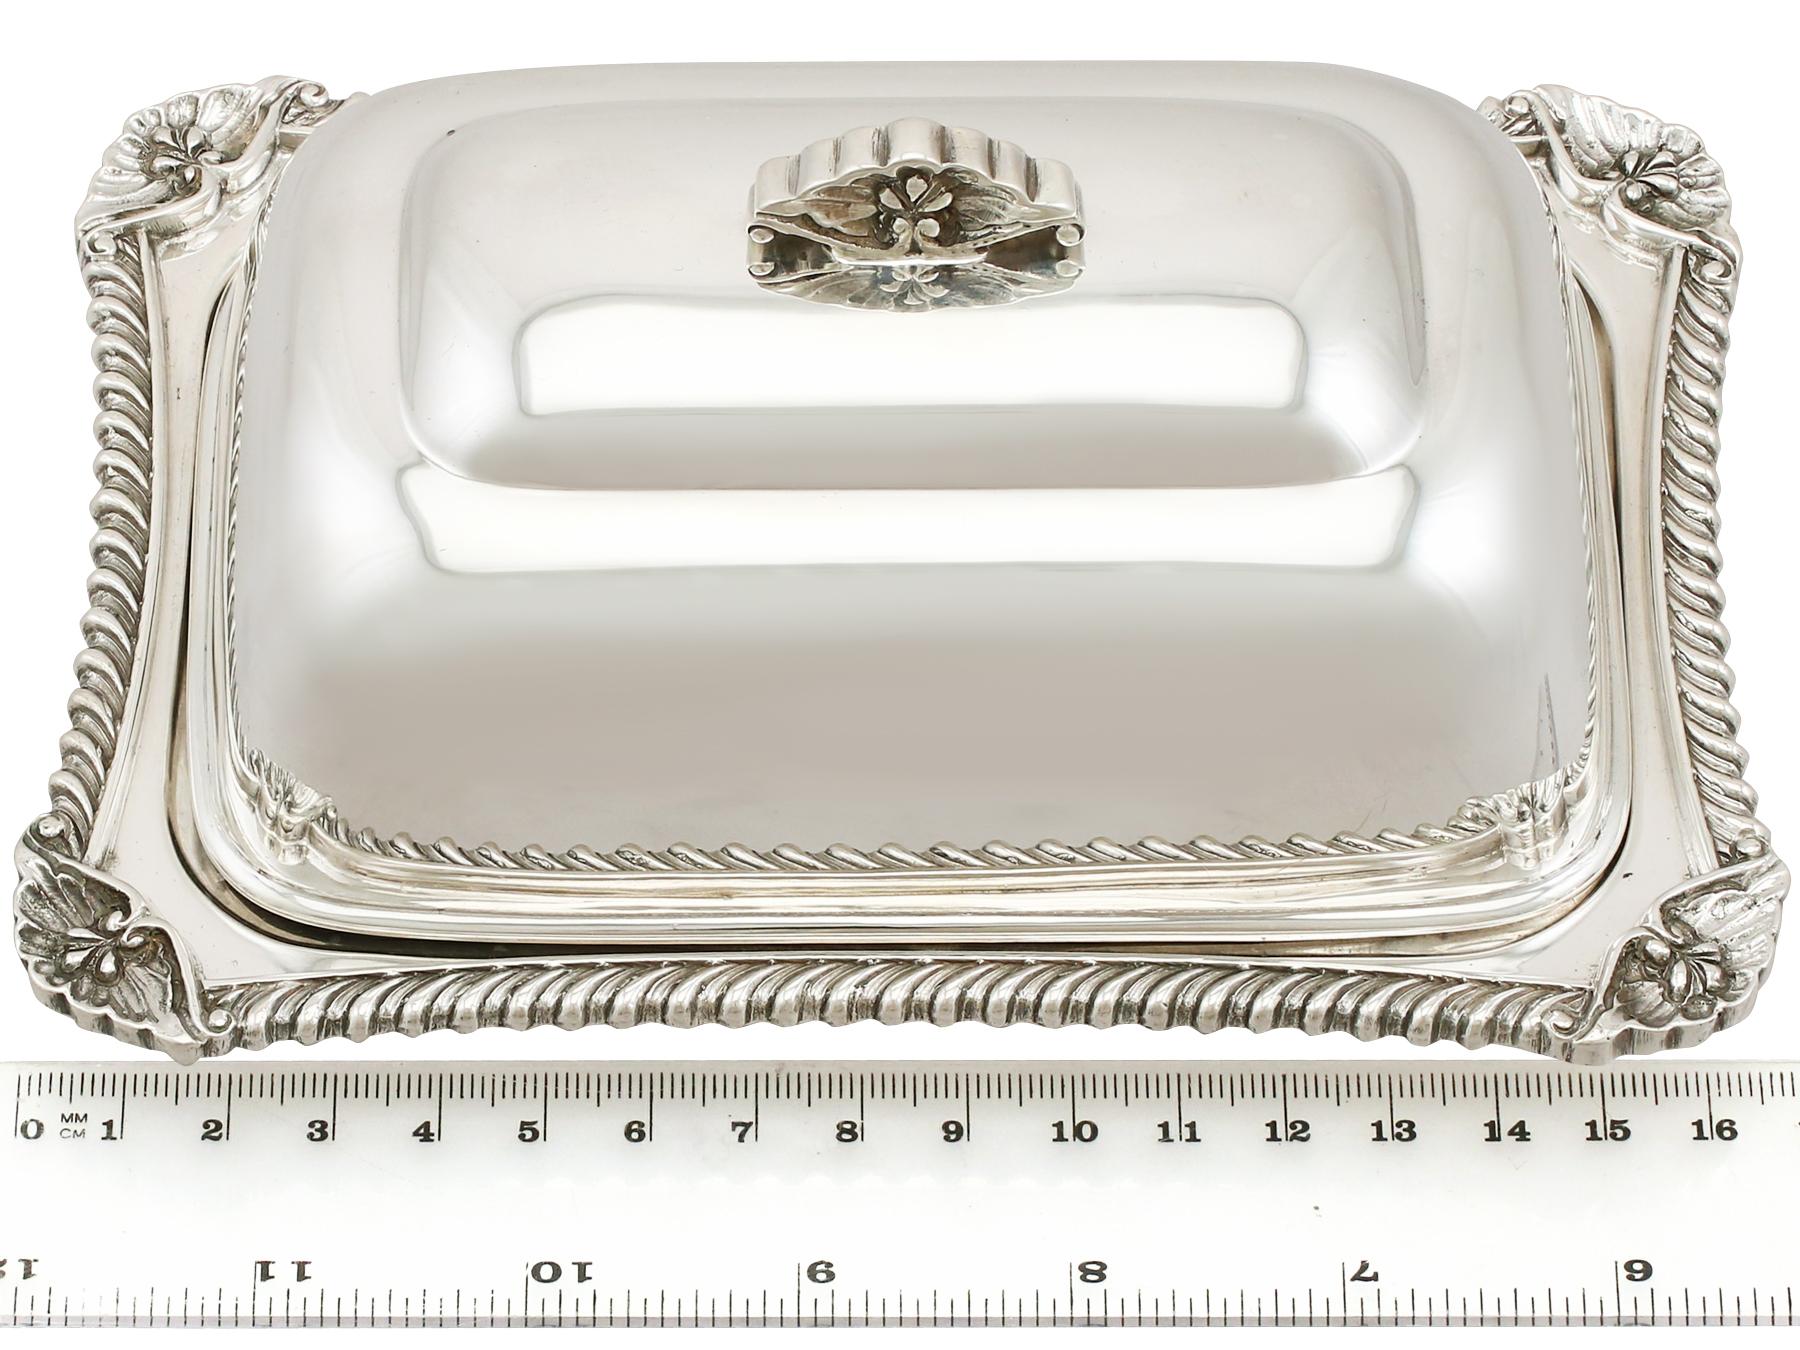 1960s Sterling Silver Butter Dish and Cover by Roberts & Belk Ltd 1